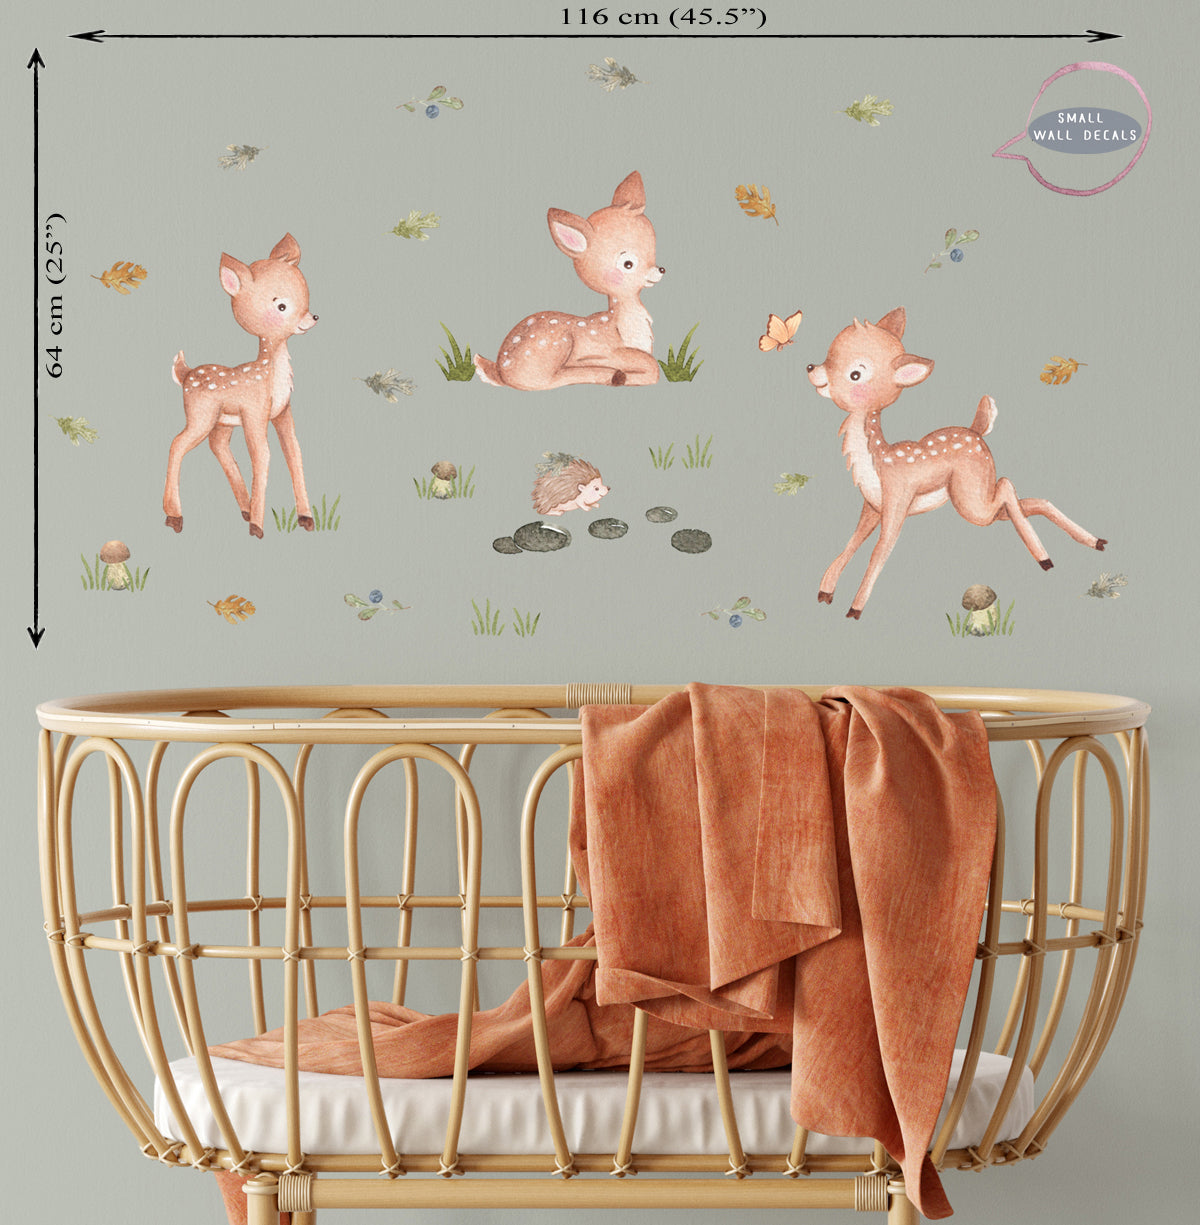 Woodland animals. Small wall decals for baby's room.